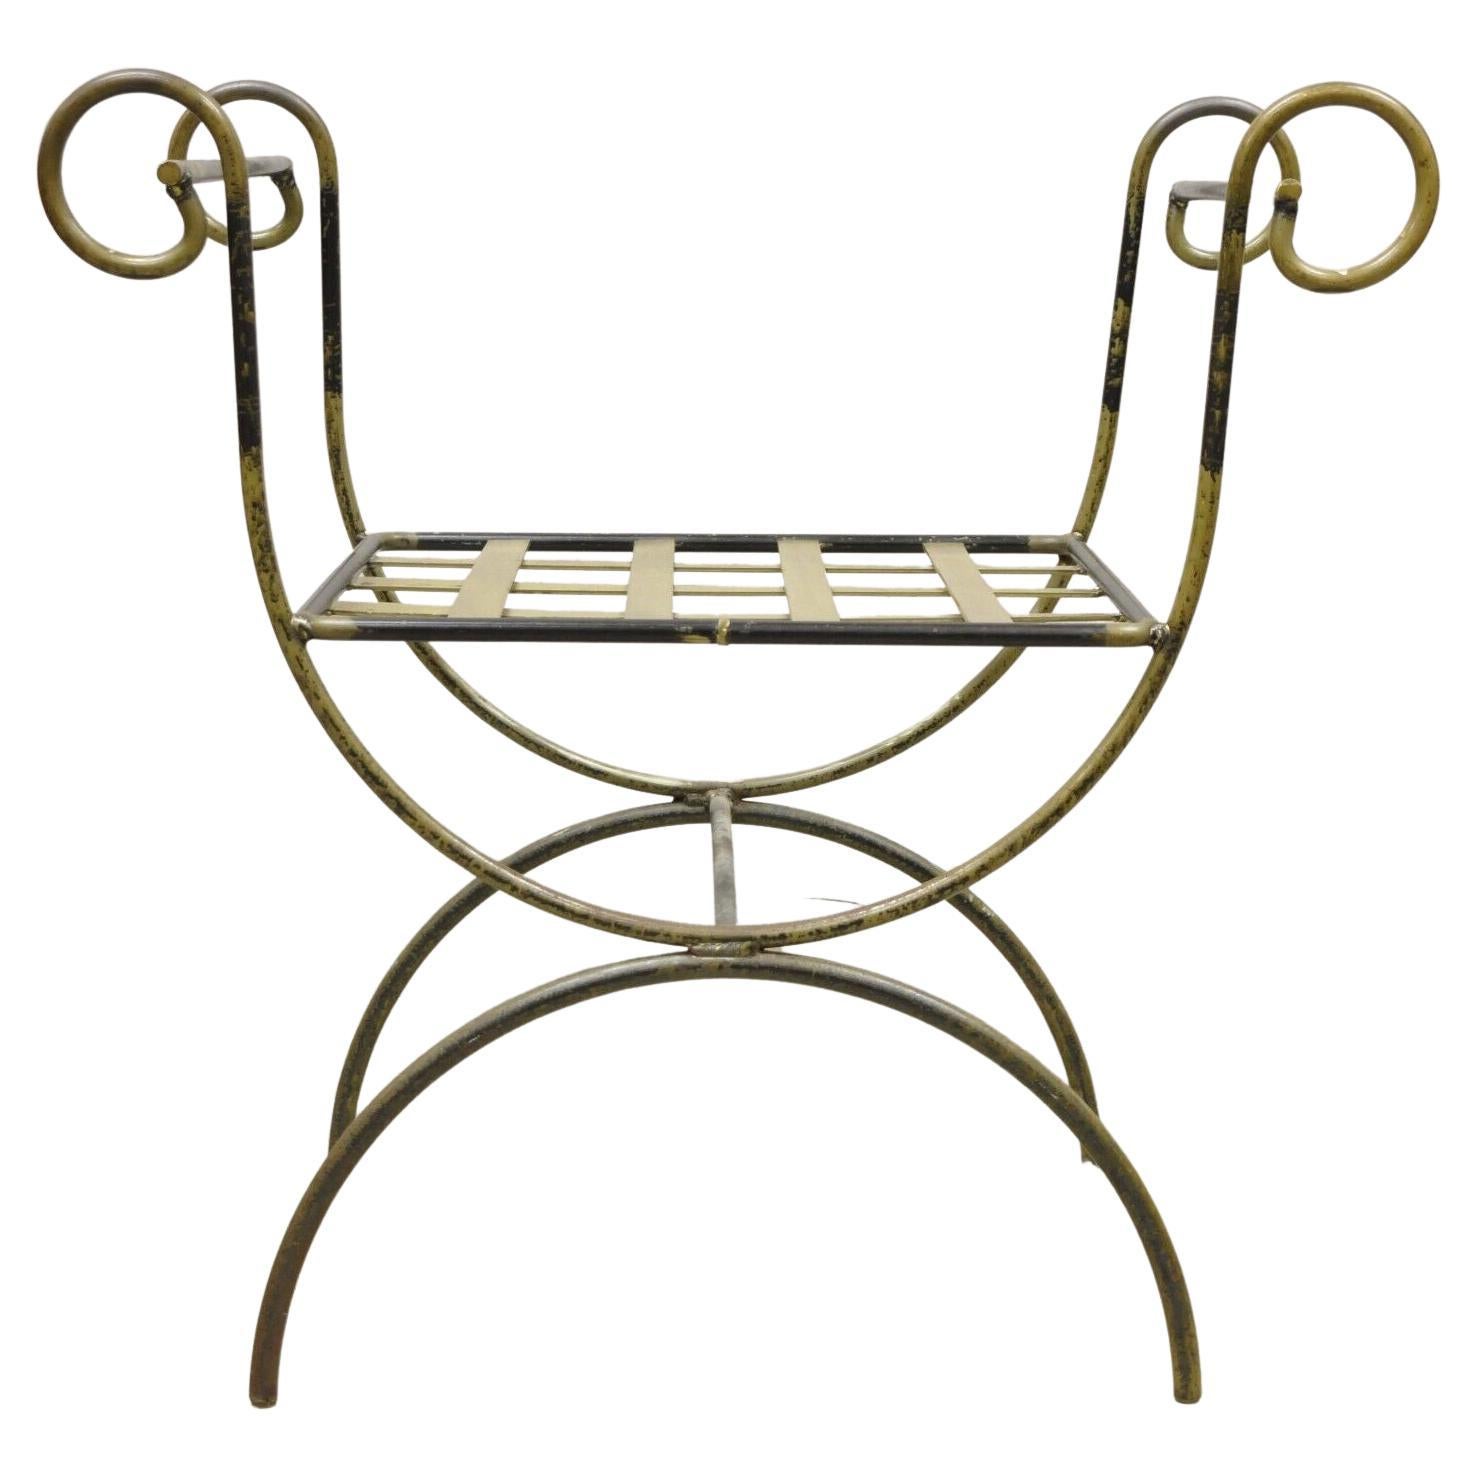 Vintage Neoclassical Style Curule Savonarola Wrought Iron Bench For Sale